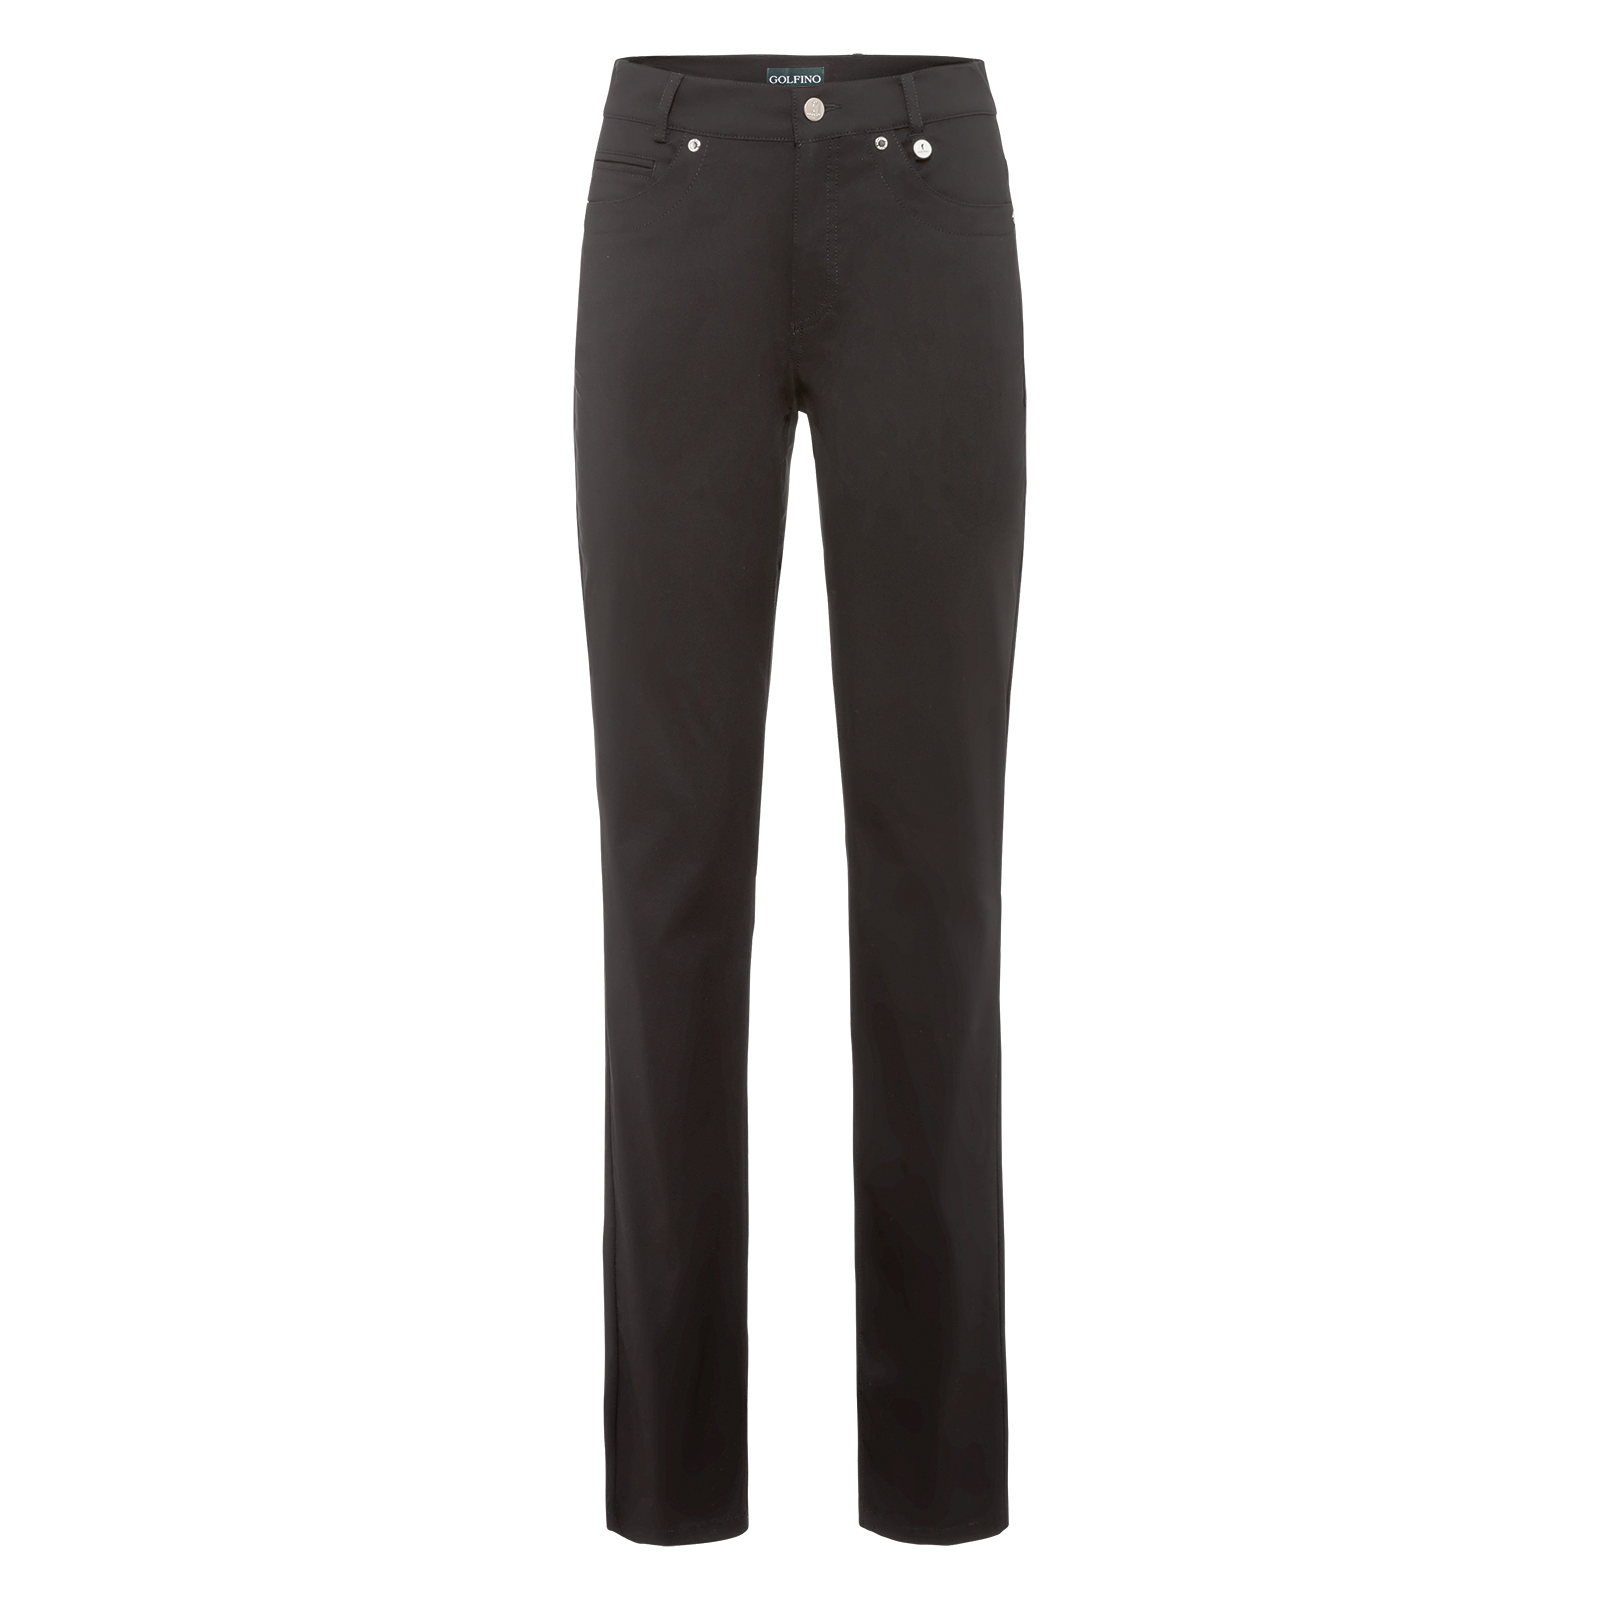 Flexible ladies' trousers made from a particularly lightweight textile material 